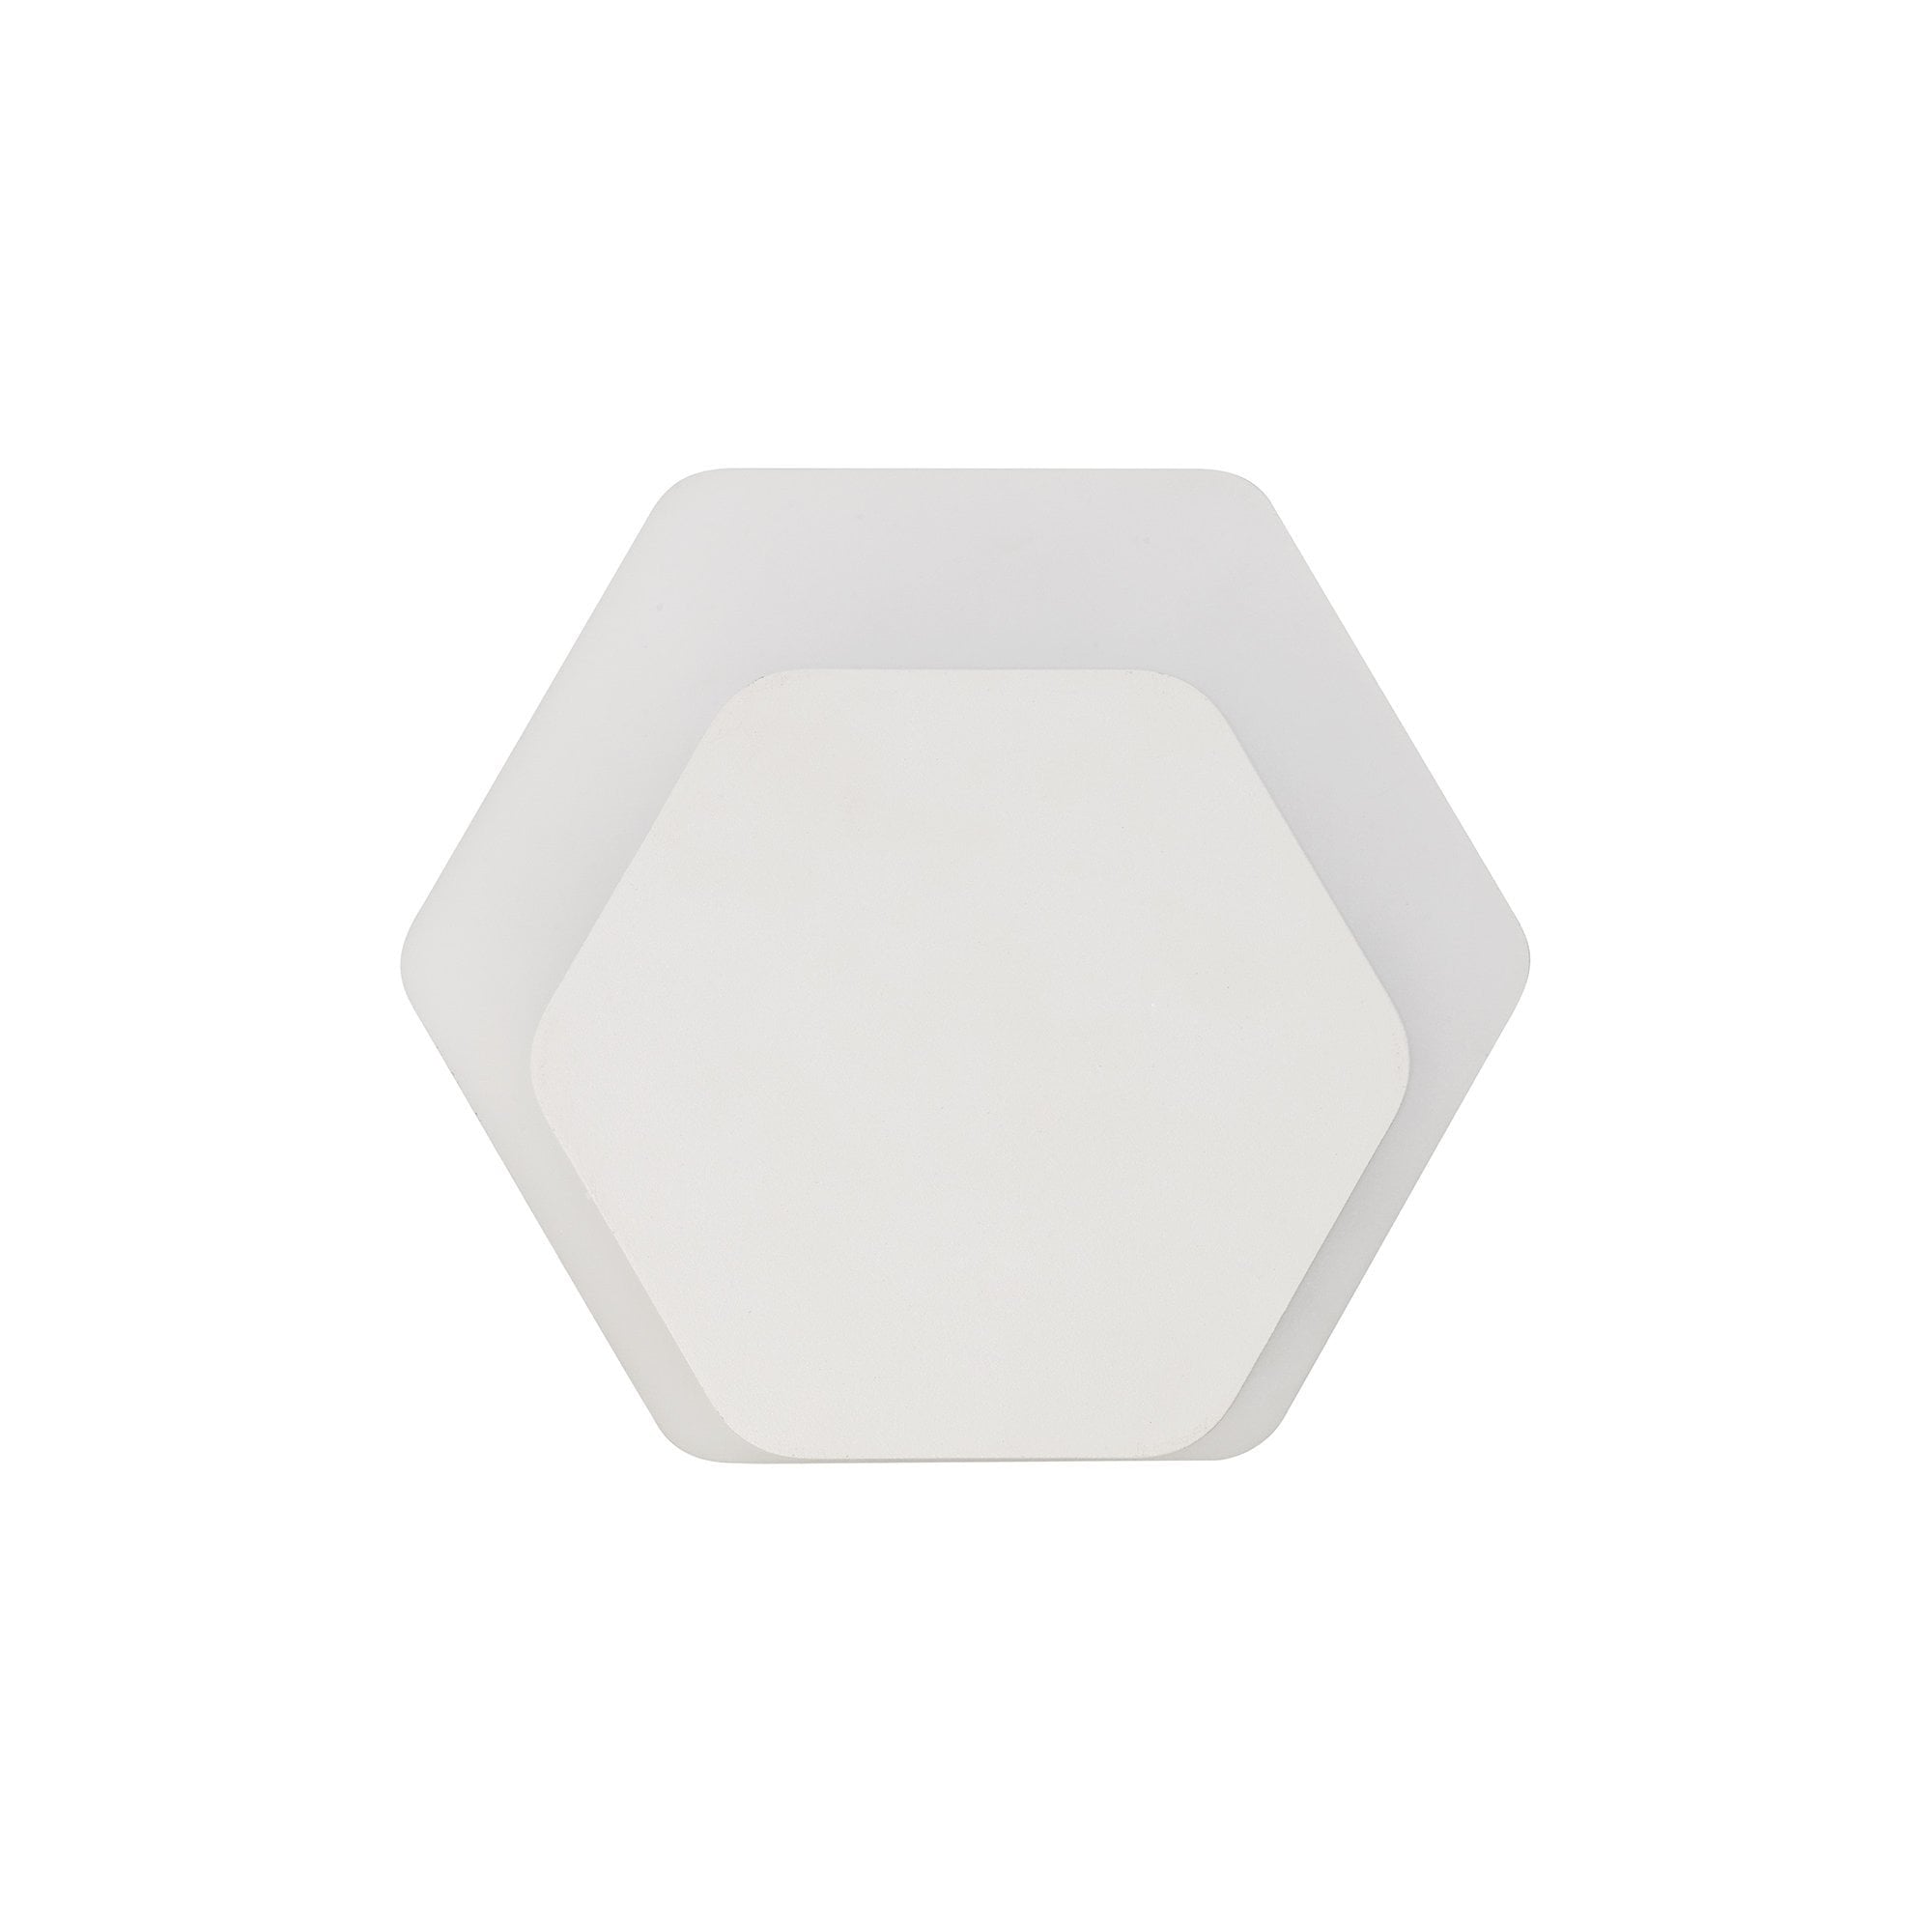 Magnetic Base Wall Lamp, 12W LED 3000K 498lm, 15/19cm Horizontal Hexagonal Bottom Offset, Sand White/Acrylic Frosted Diffuser